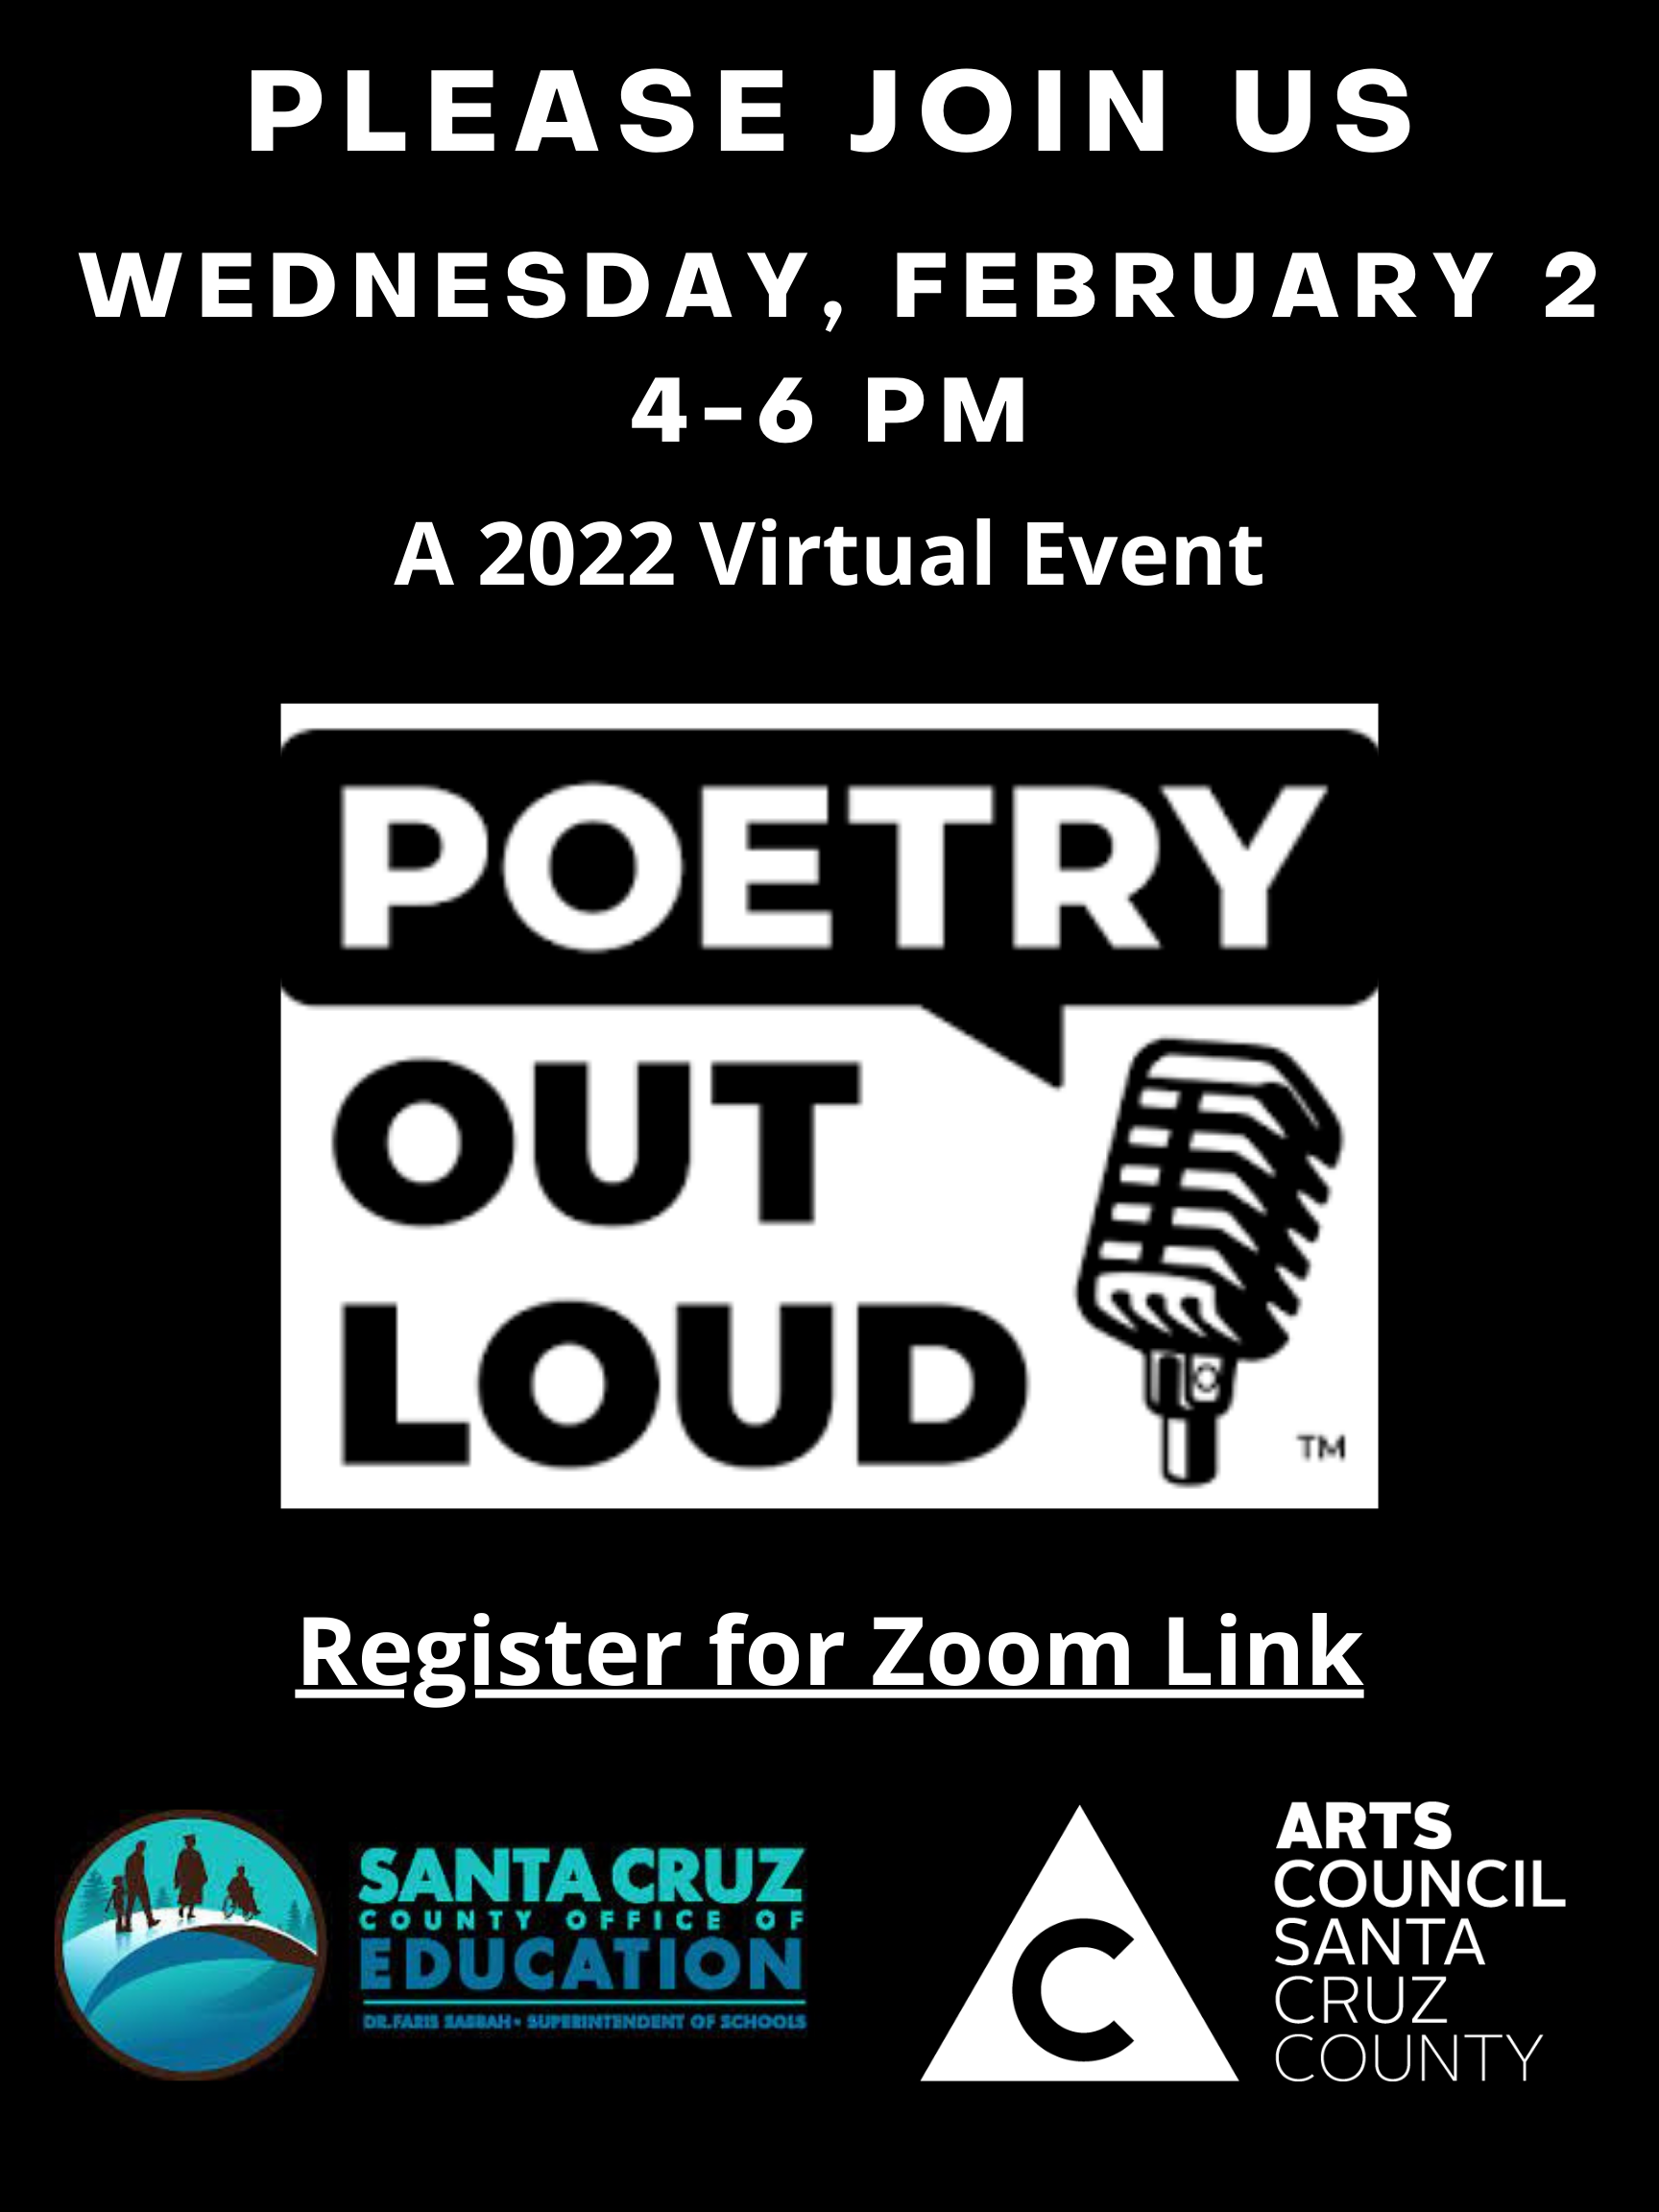 poetry out lout virtual event; call 831-335-4425 x200 for details